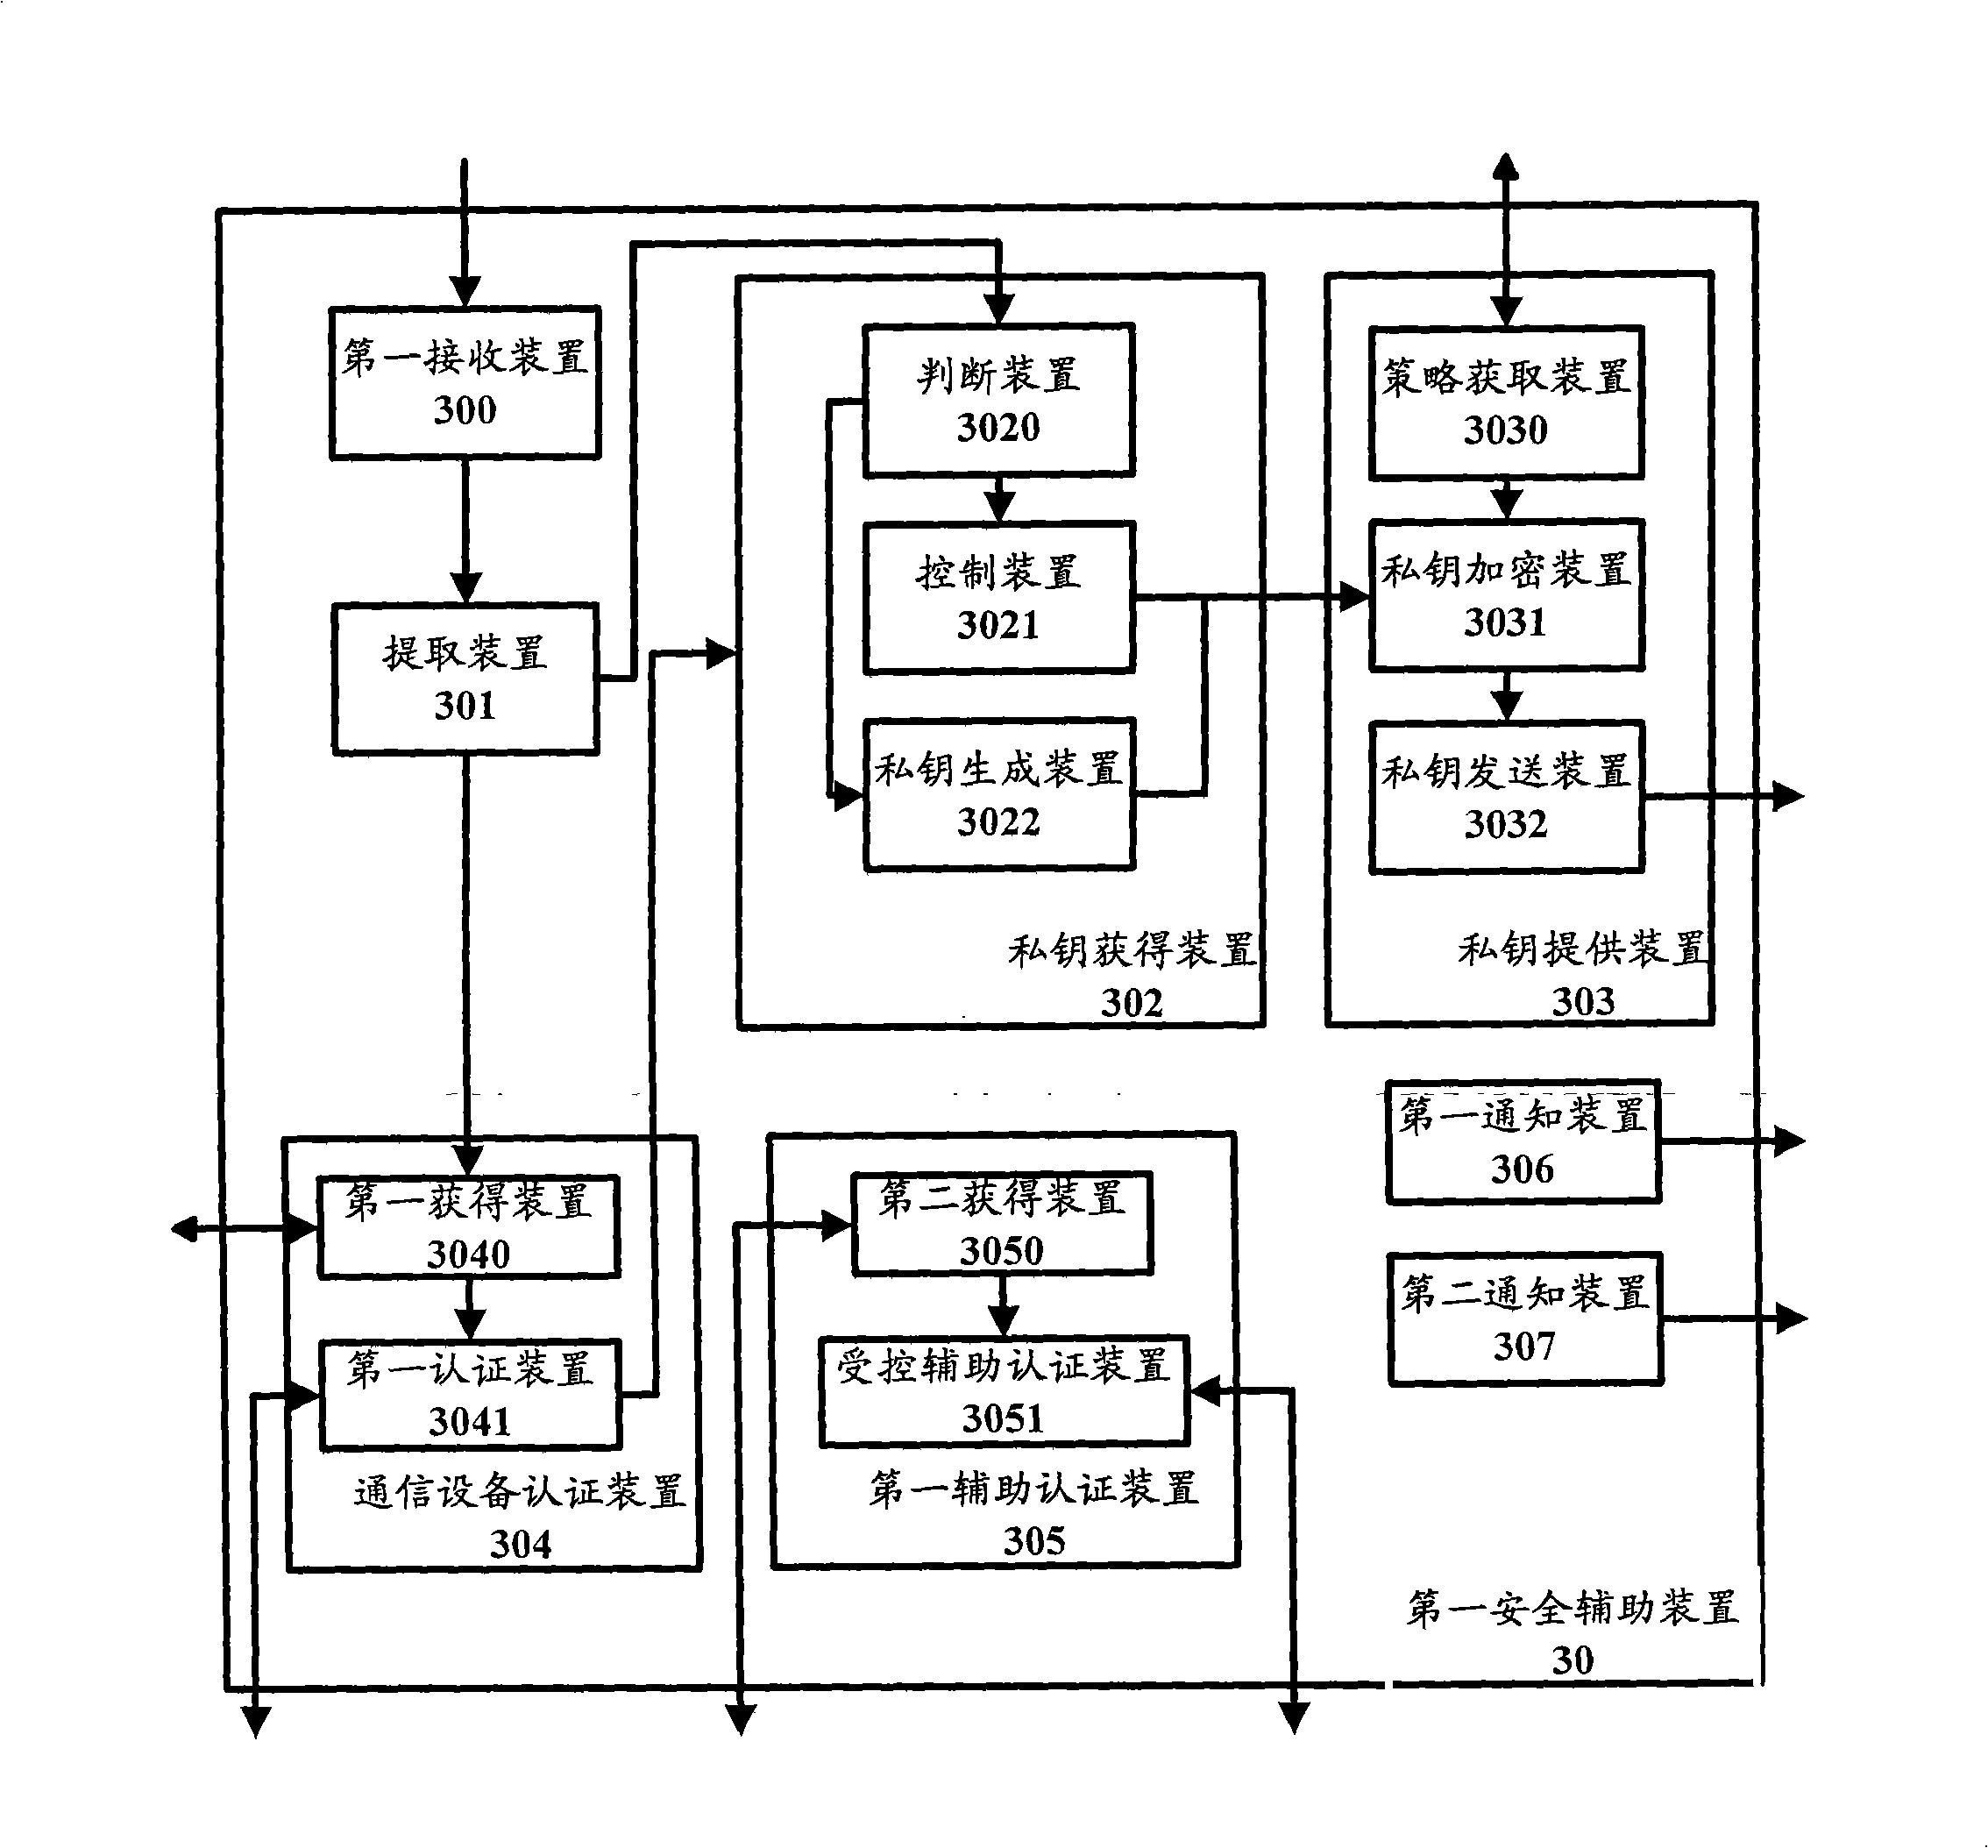 Identity authentication and secret key negotiation method and device in communication network